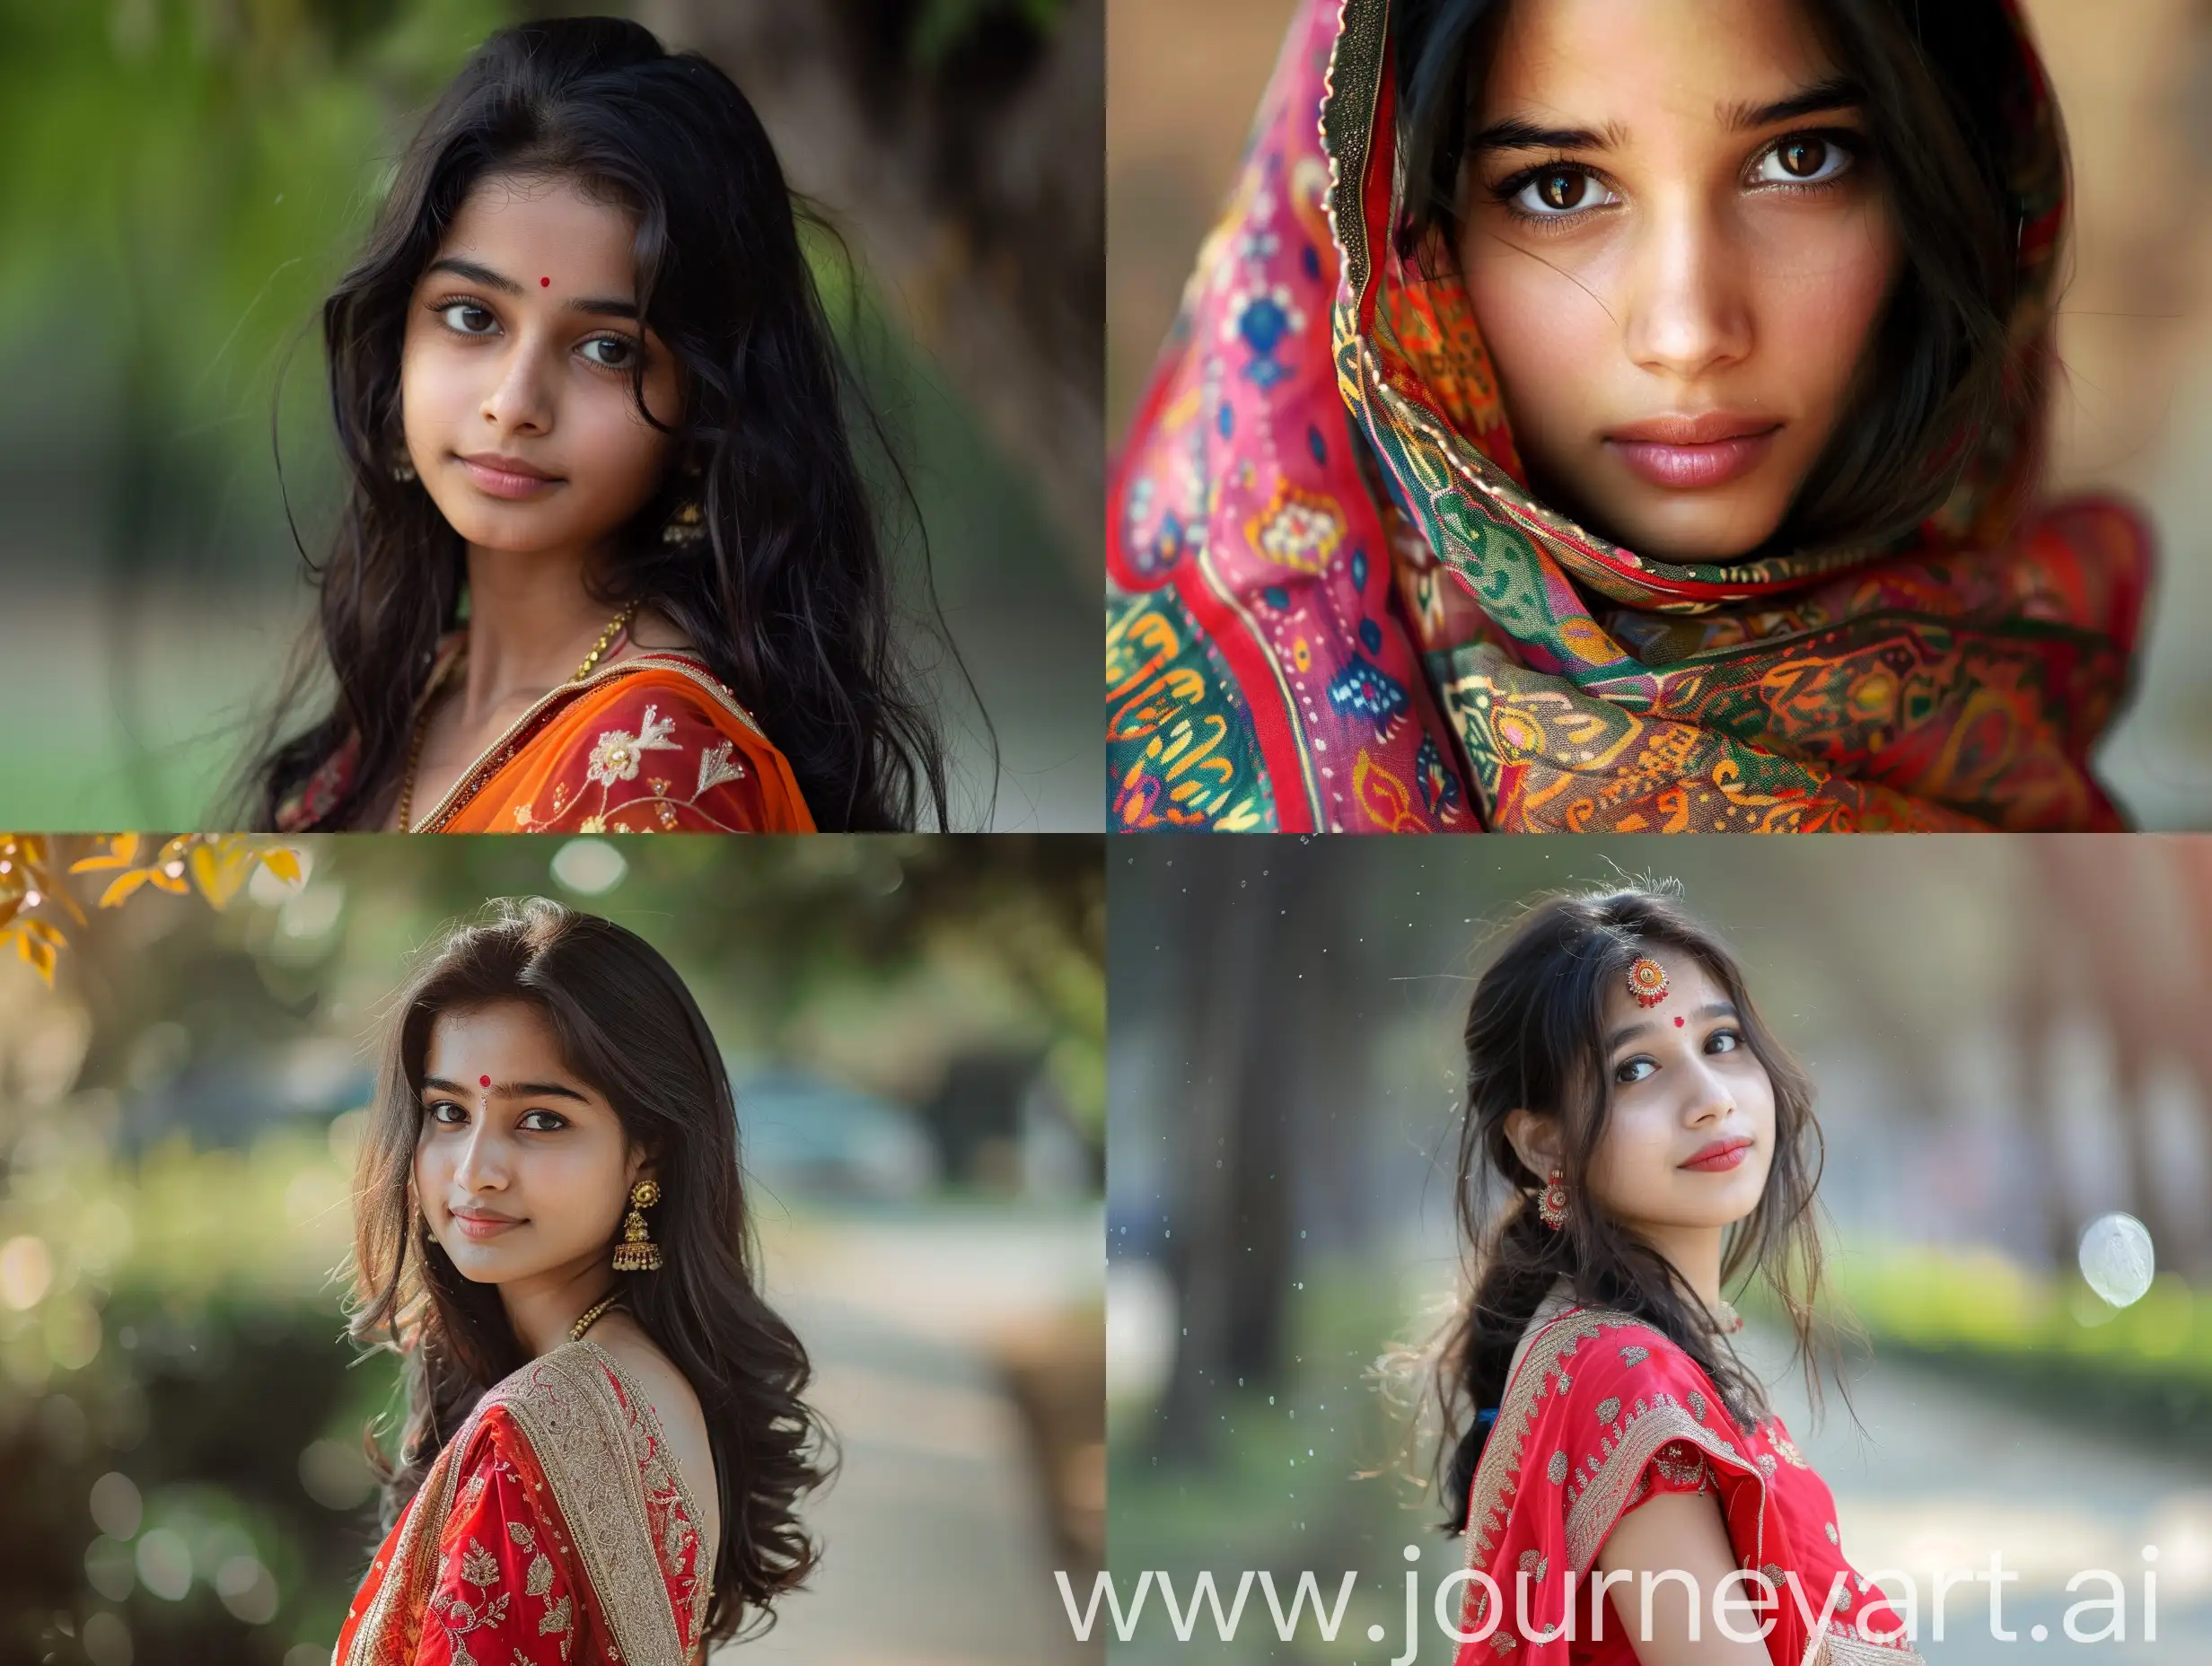 Vibrant-Indian-Woman-in-Traditional-Attire-Cultural-Beauty-Portrait